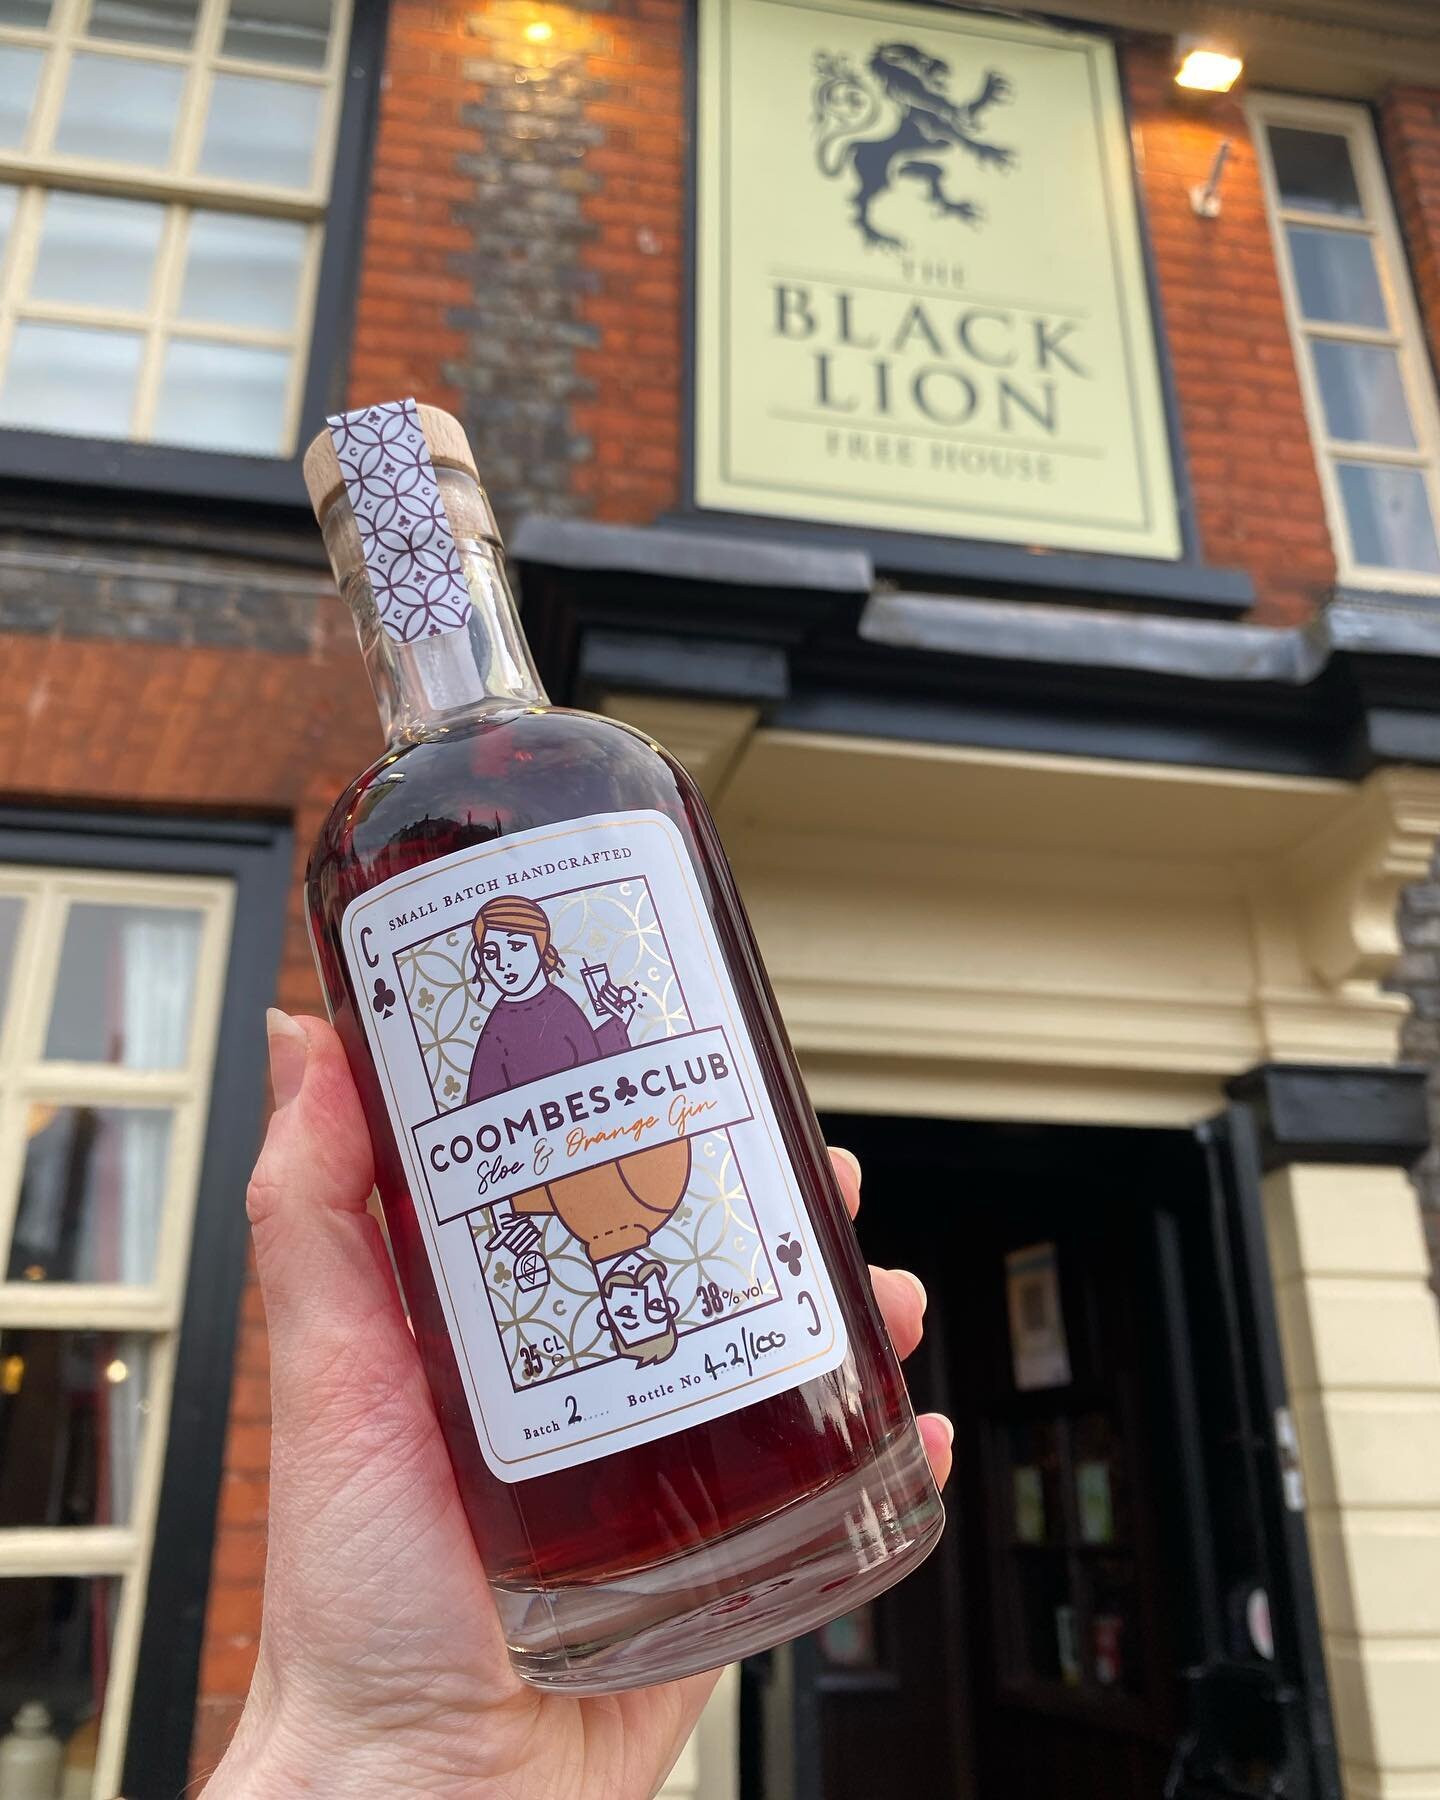 If you haven&rsquo;t had chance to try our new flavour yet get down to the @blacklion.lb tonight and order yourself a Sloe and Orange 🍊 
Getting you ready for summer, best served with Sicilian lemon 🍋
Our sell out original is also back in stock! Ha